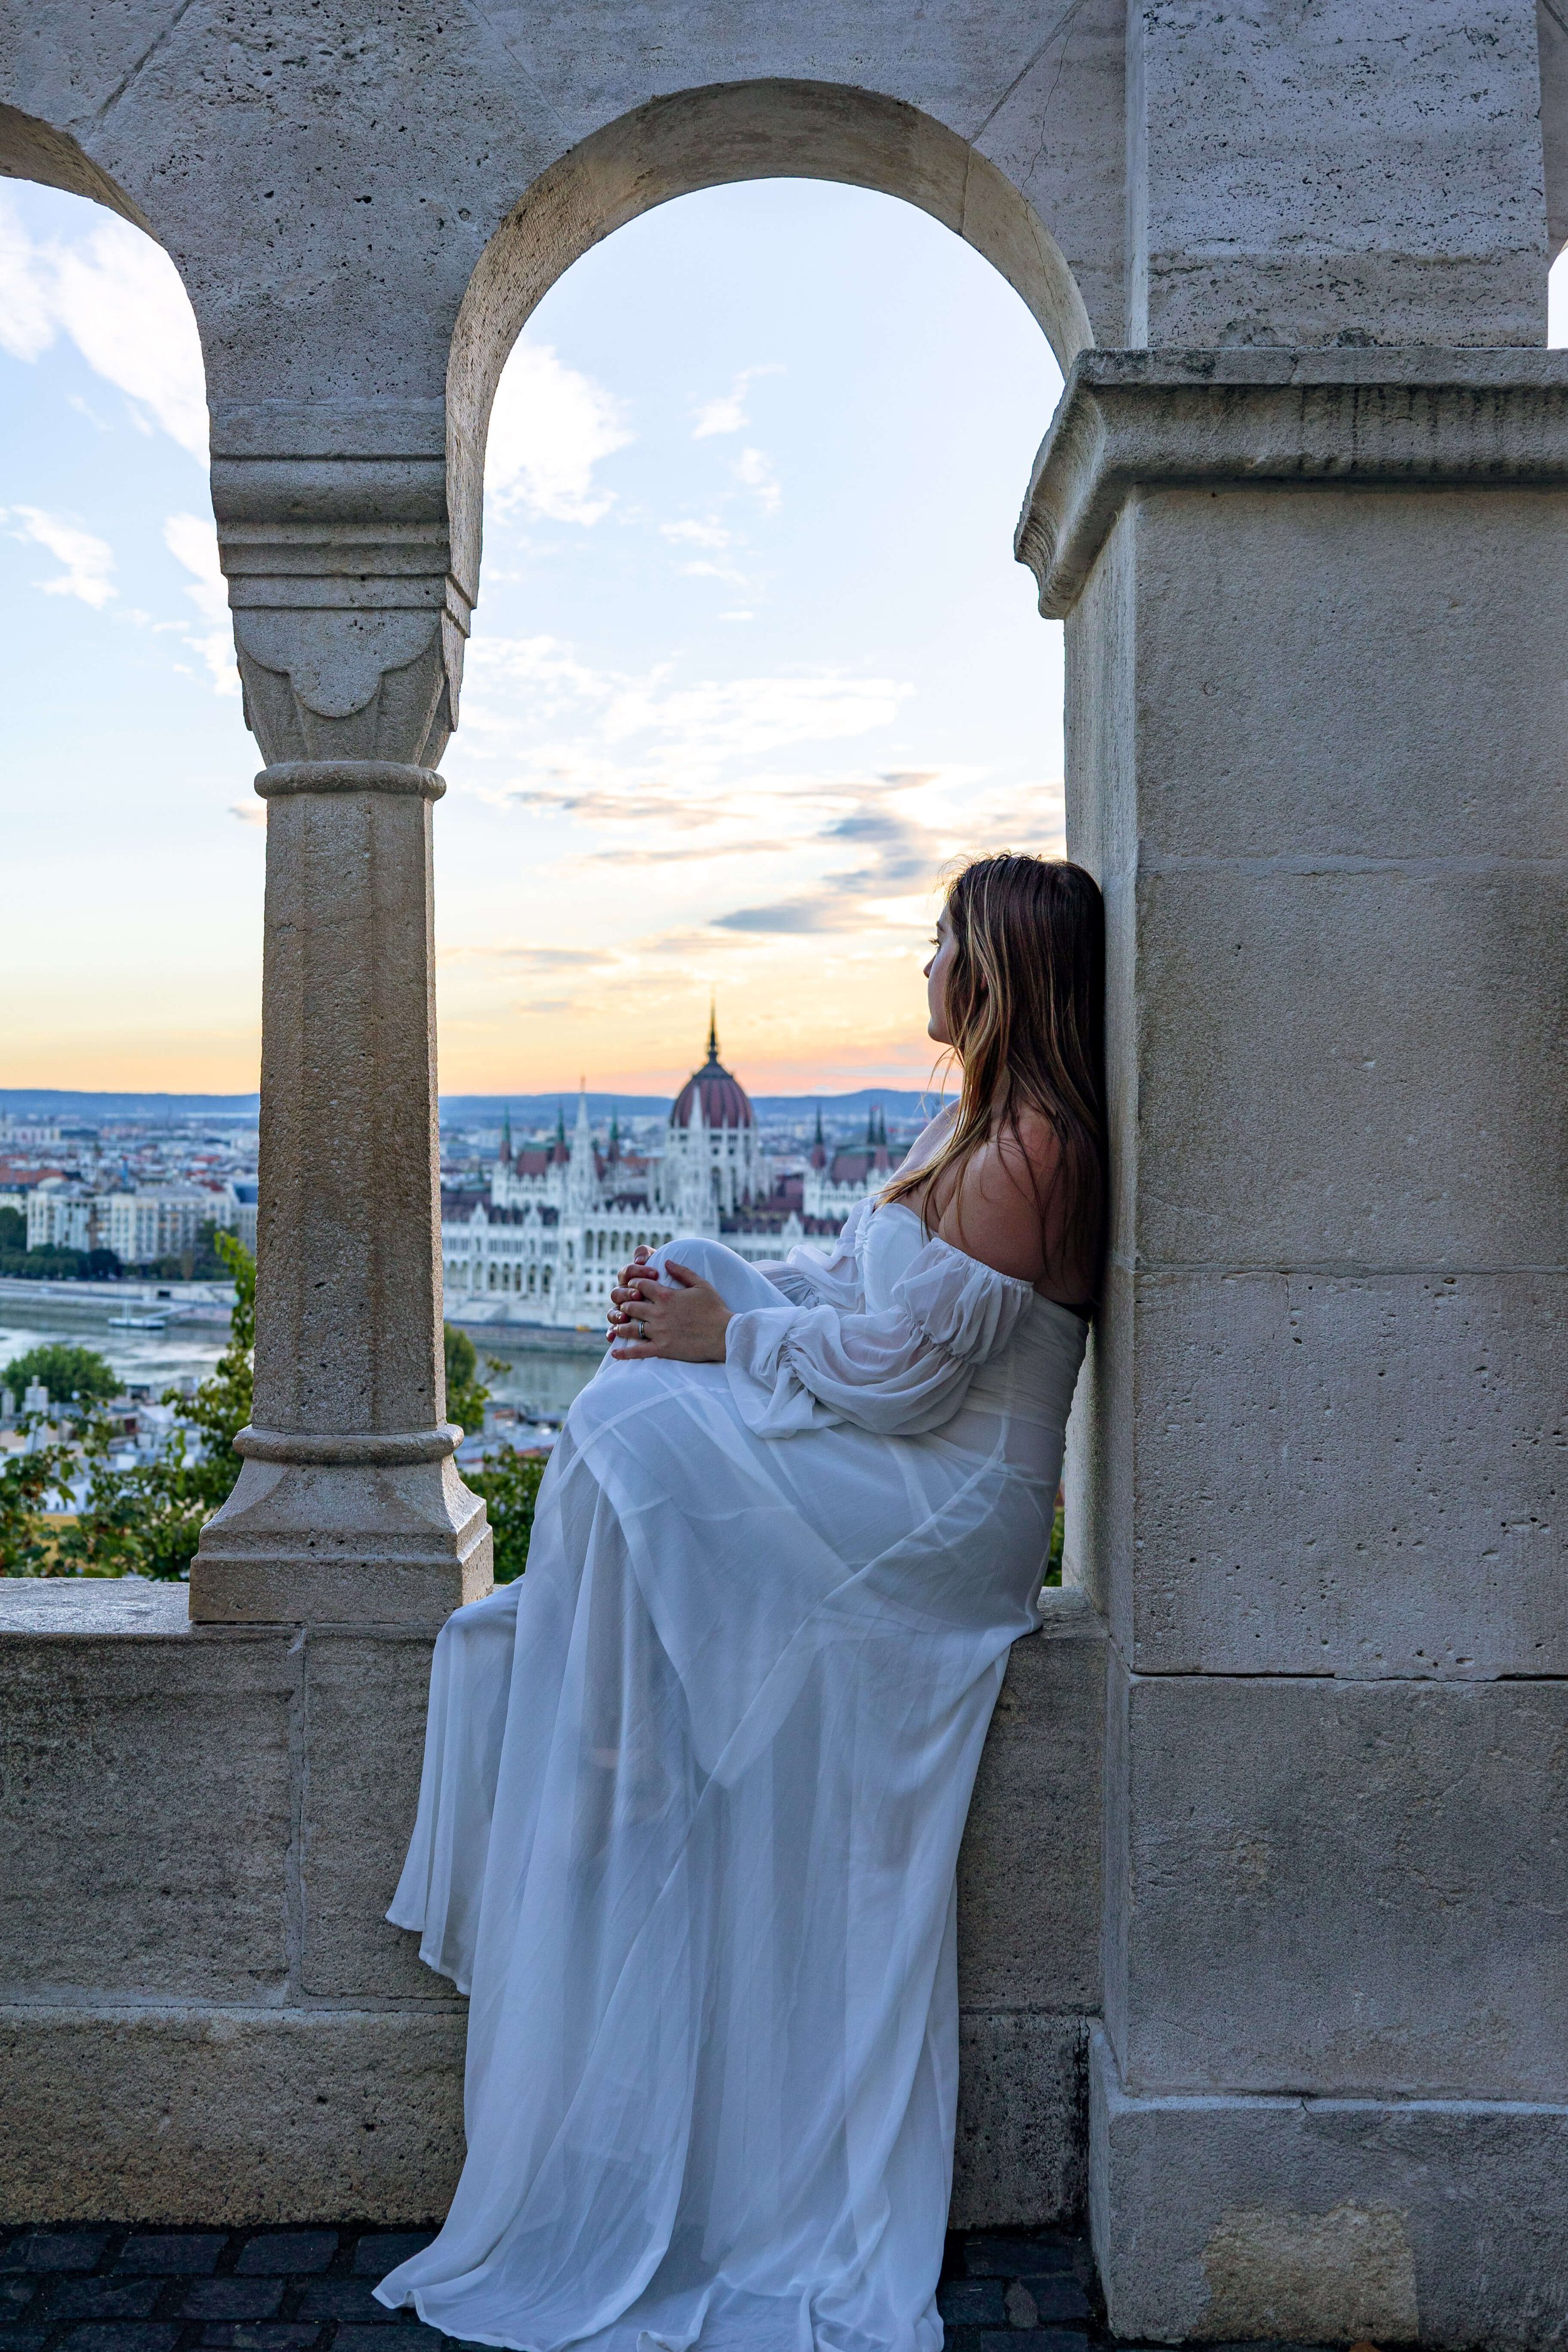 woman in window overlooking danube and parliament budapest hungary.jpg